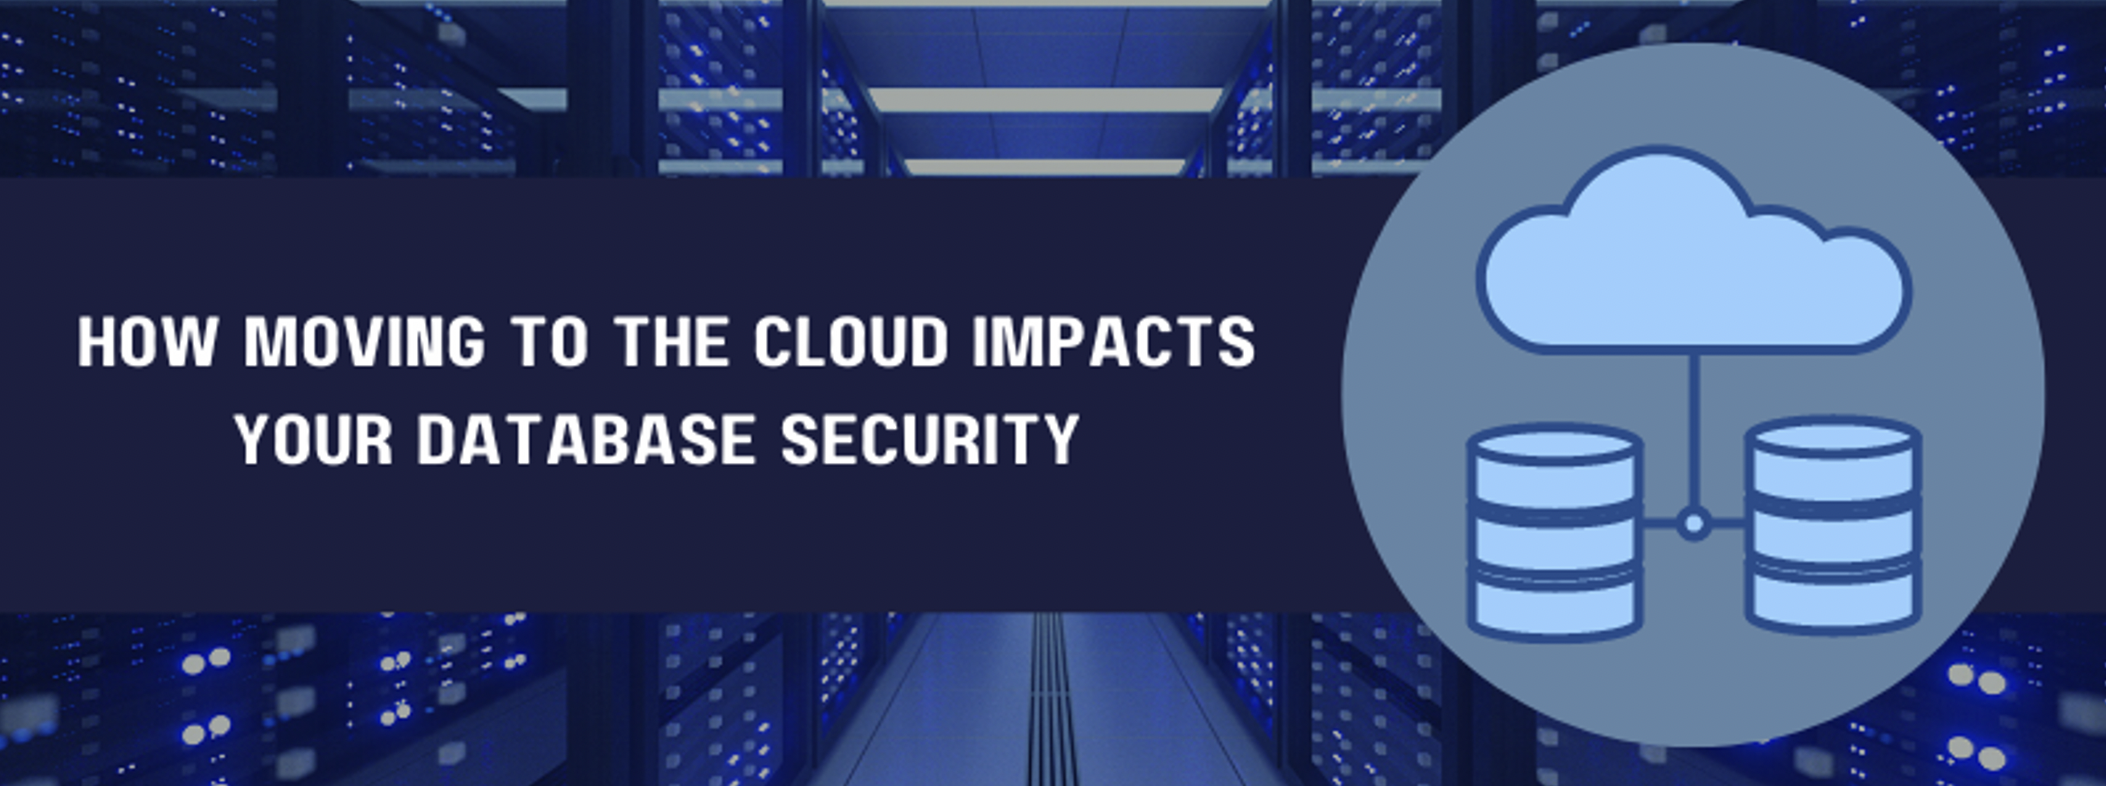 How Moving to the Cloud Impacts Your Database Security